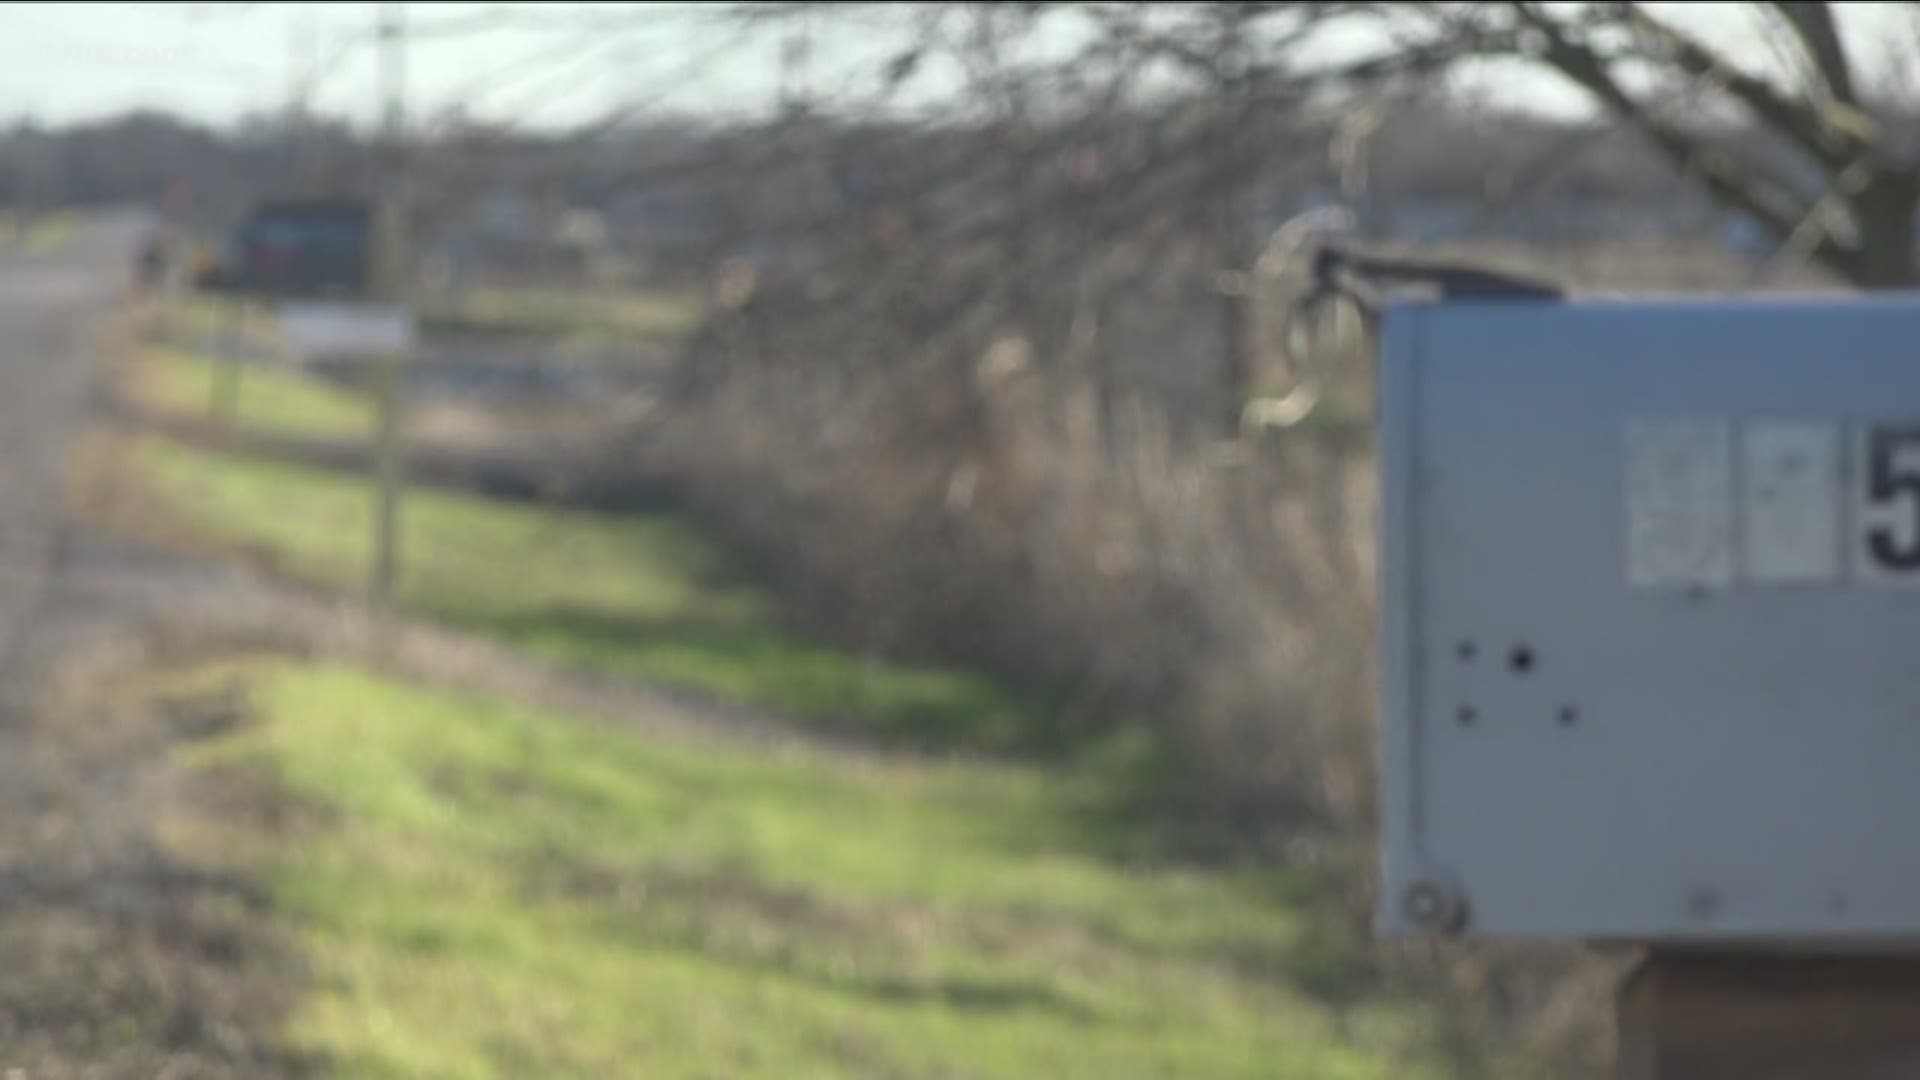 Mail thieves have hit the same county road in Hutto three or four times since Thanksgiving, according to neighbors.